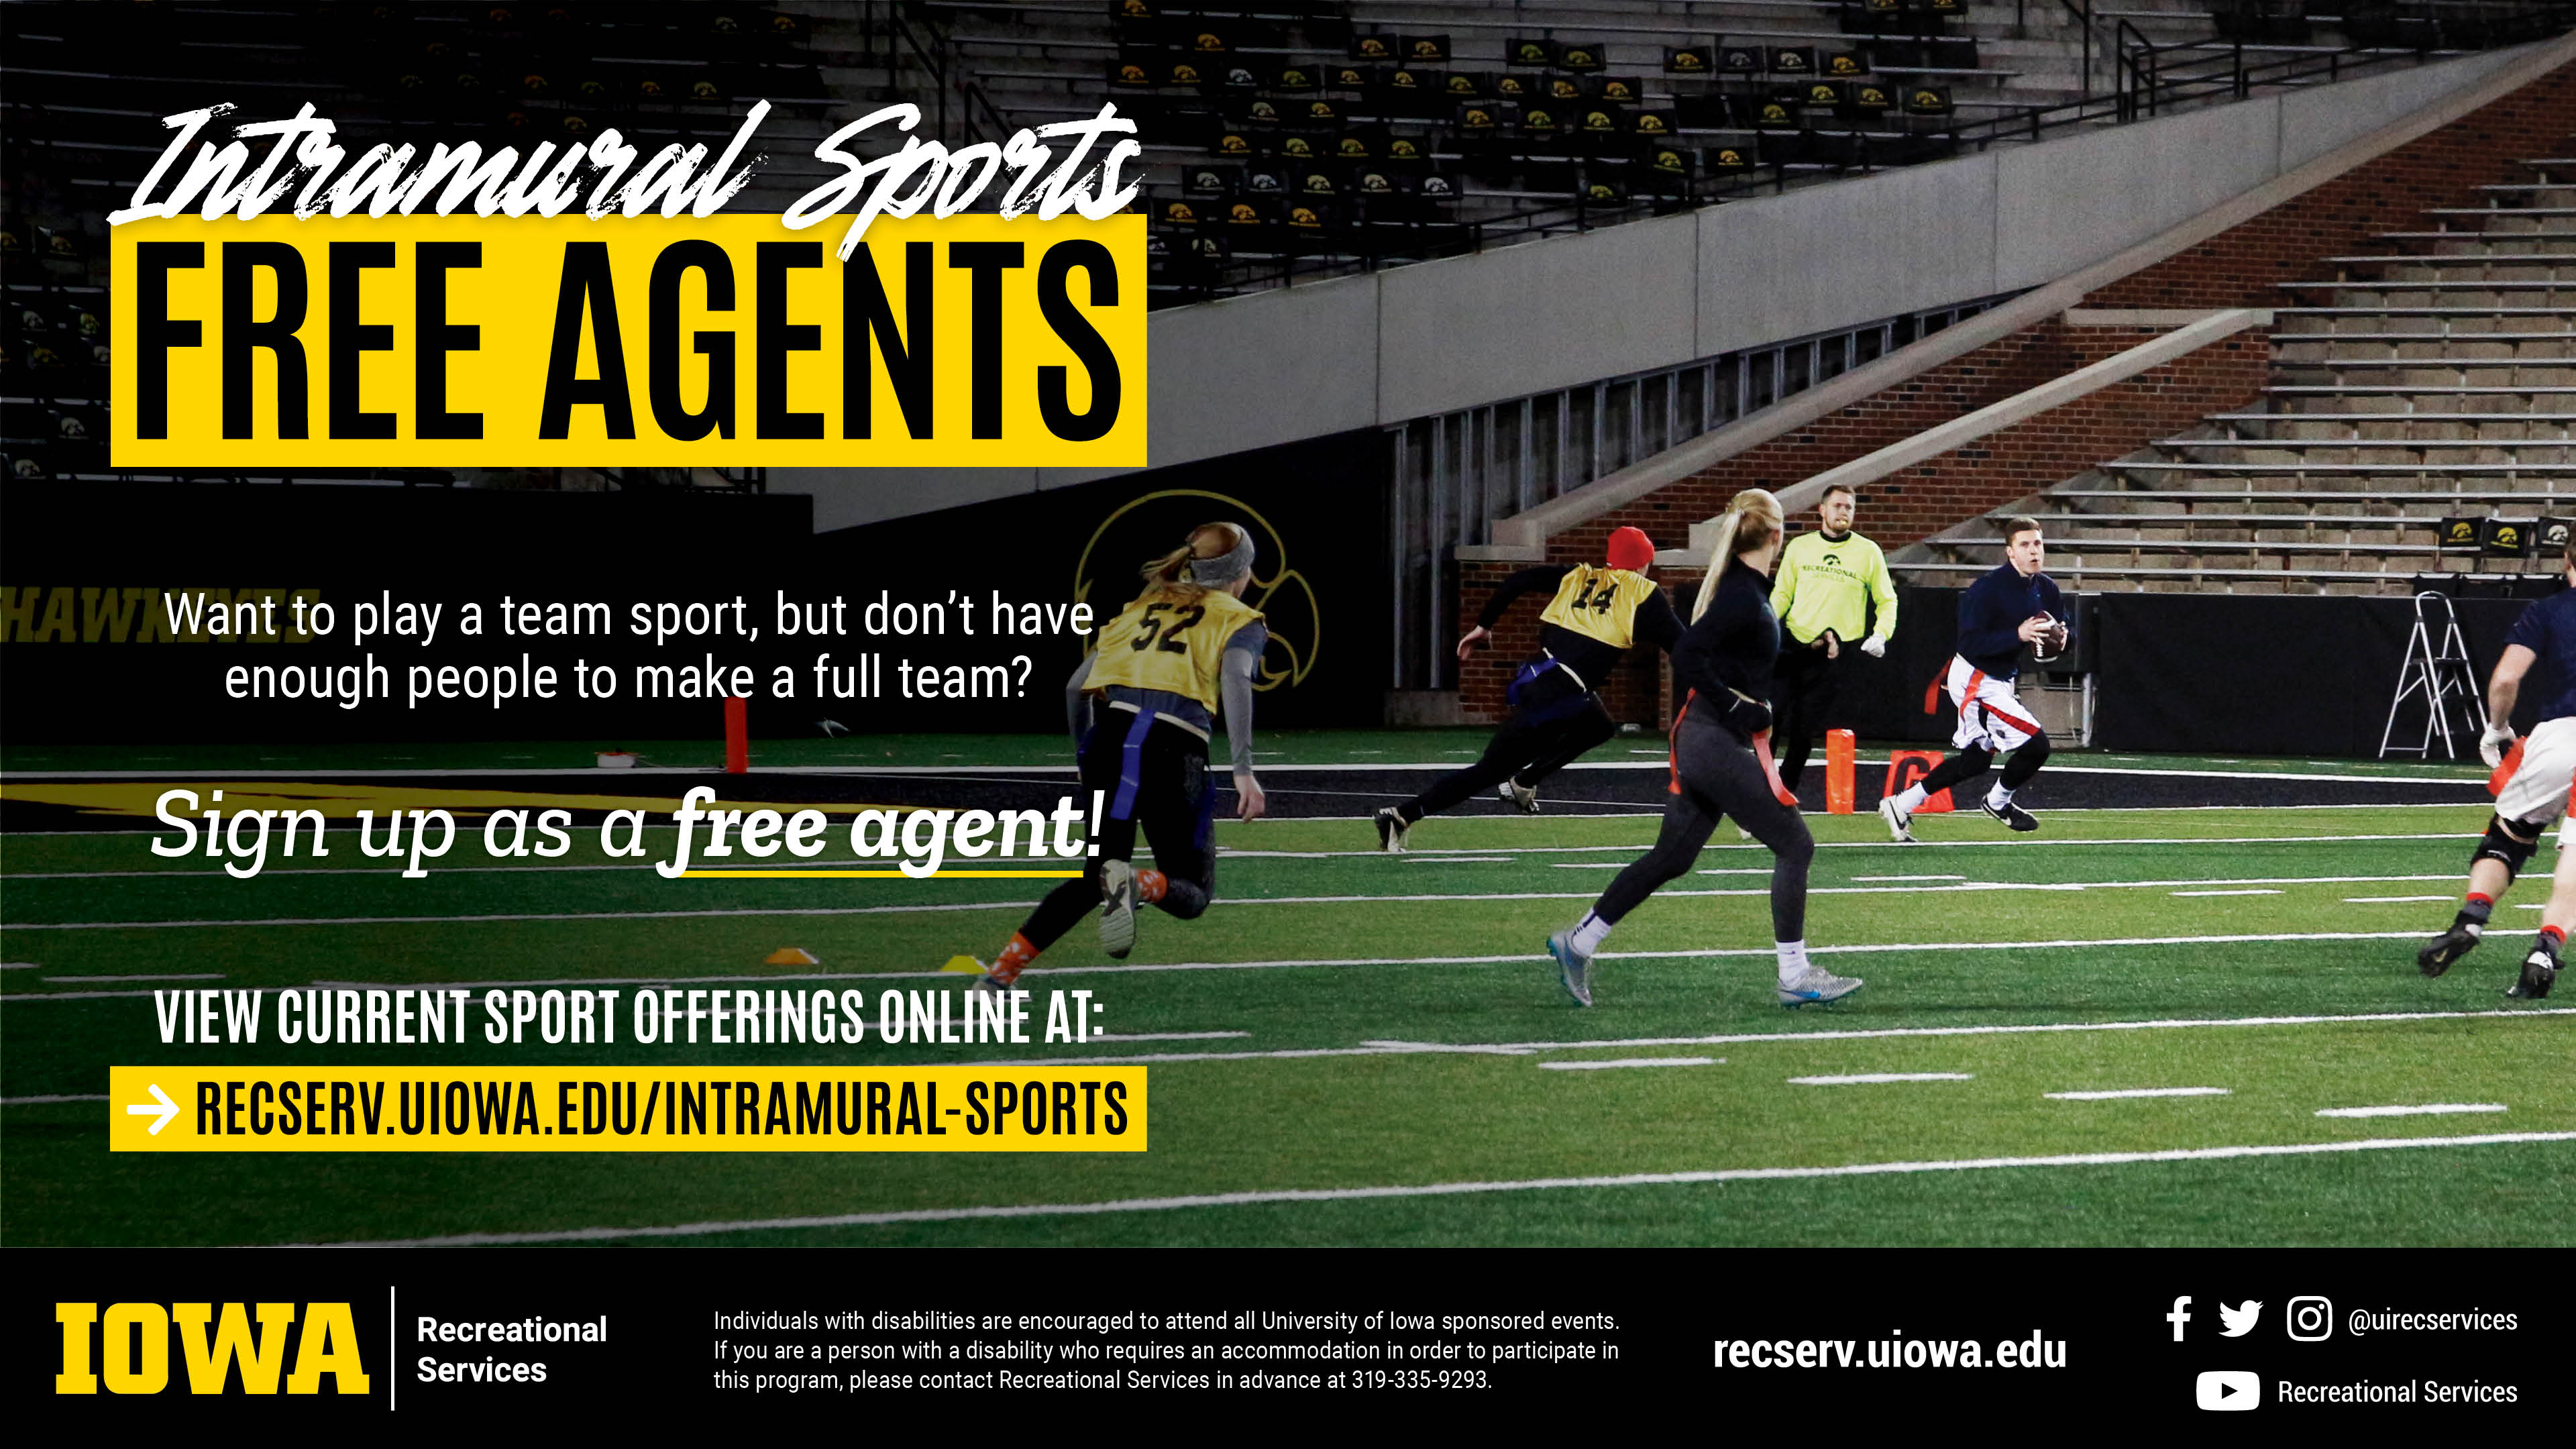 Intramural Sports Free Agents. Want to play a team sports, but don't have enough people to make a full team? Sign up as a free agent! View current sport offerings online at: recserv.uiowa.edu/intramural-sports